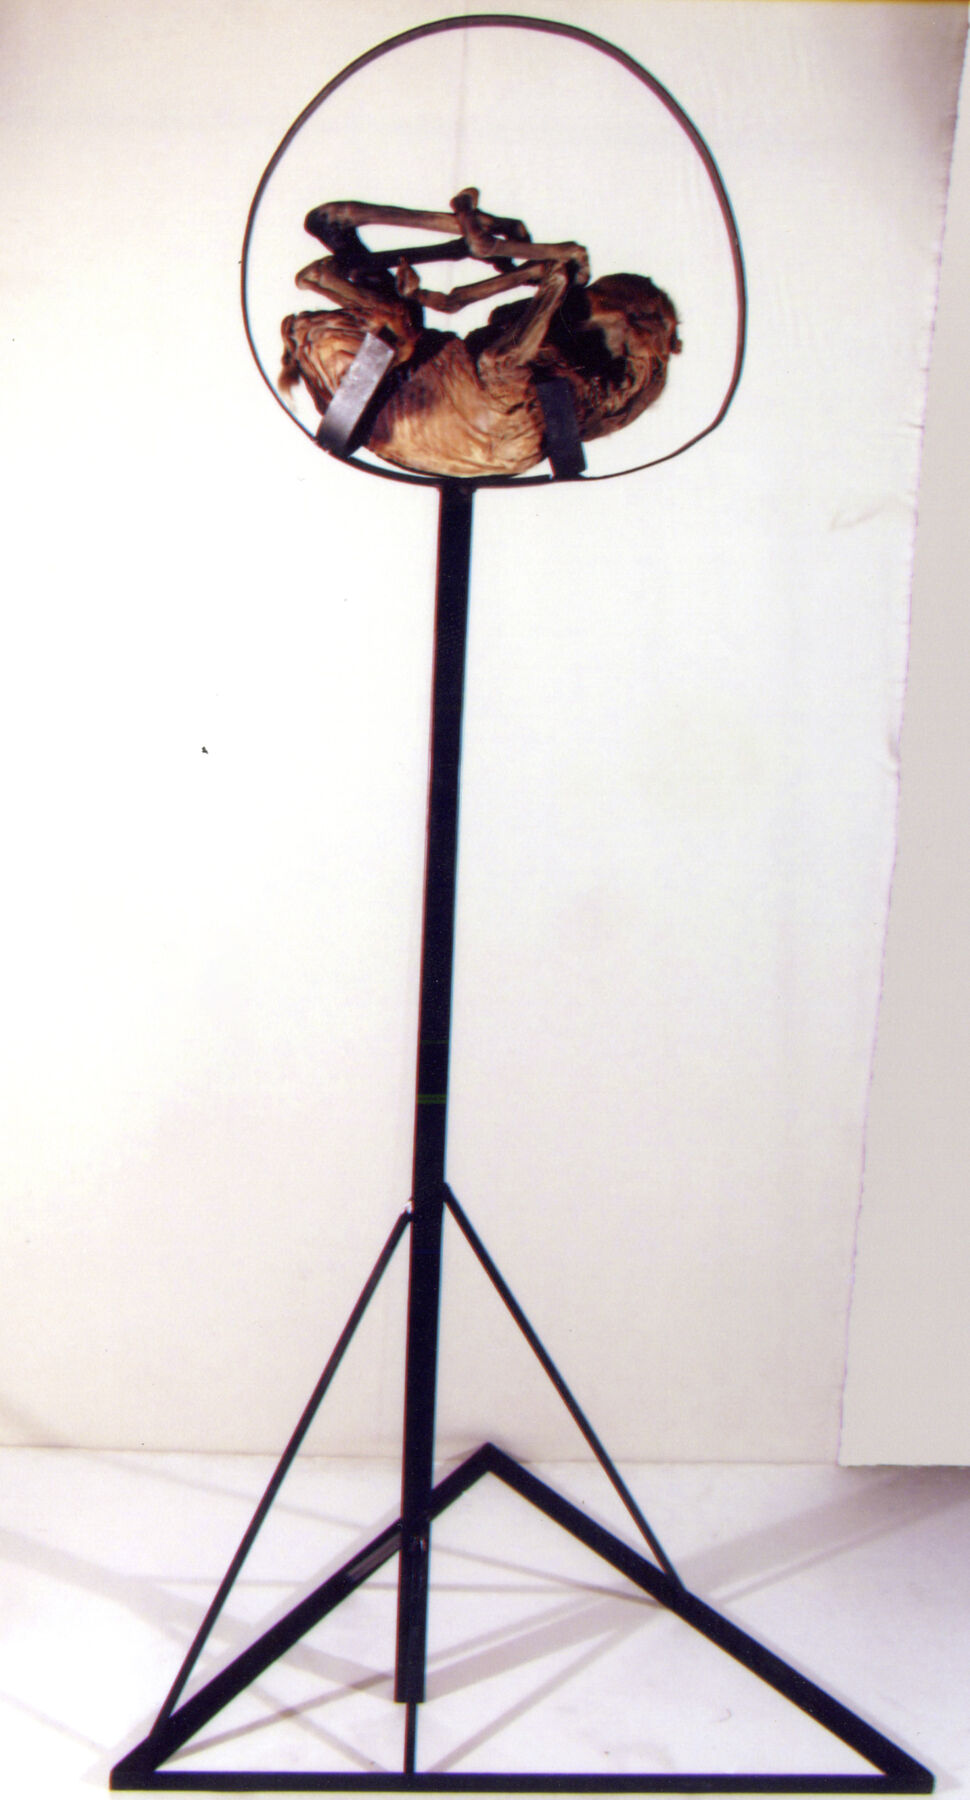 A curled-up dried mummified horse fetus being held on by a tripod